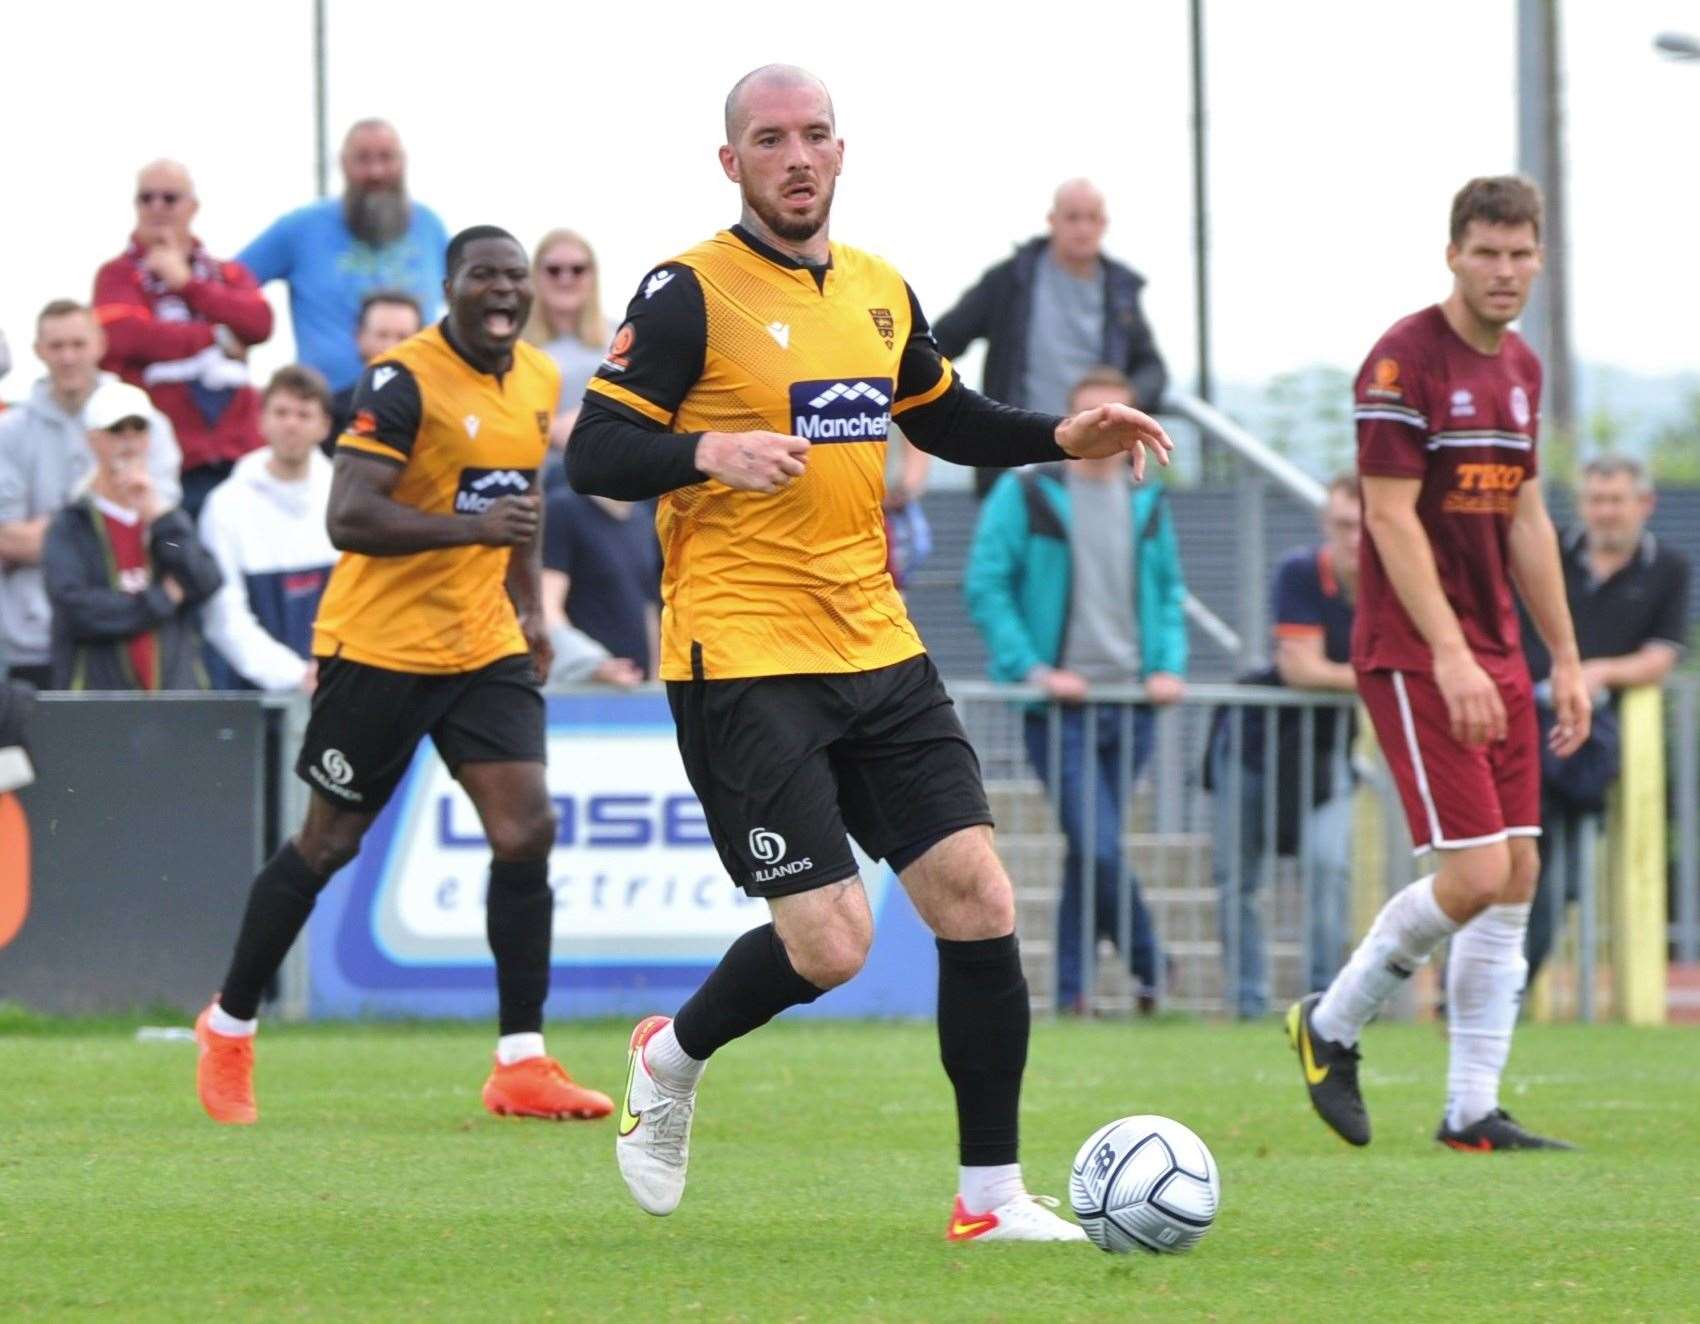 Joe Ellul in action for Maidstone at Chelmsford Picture: Steve Terrell